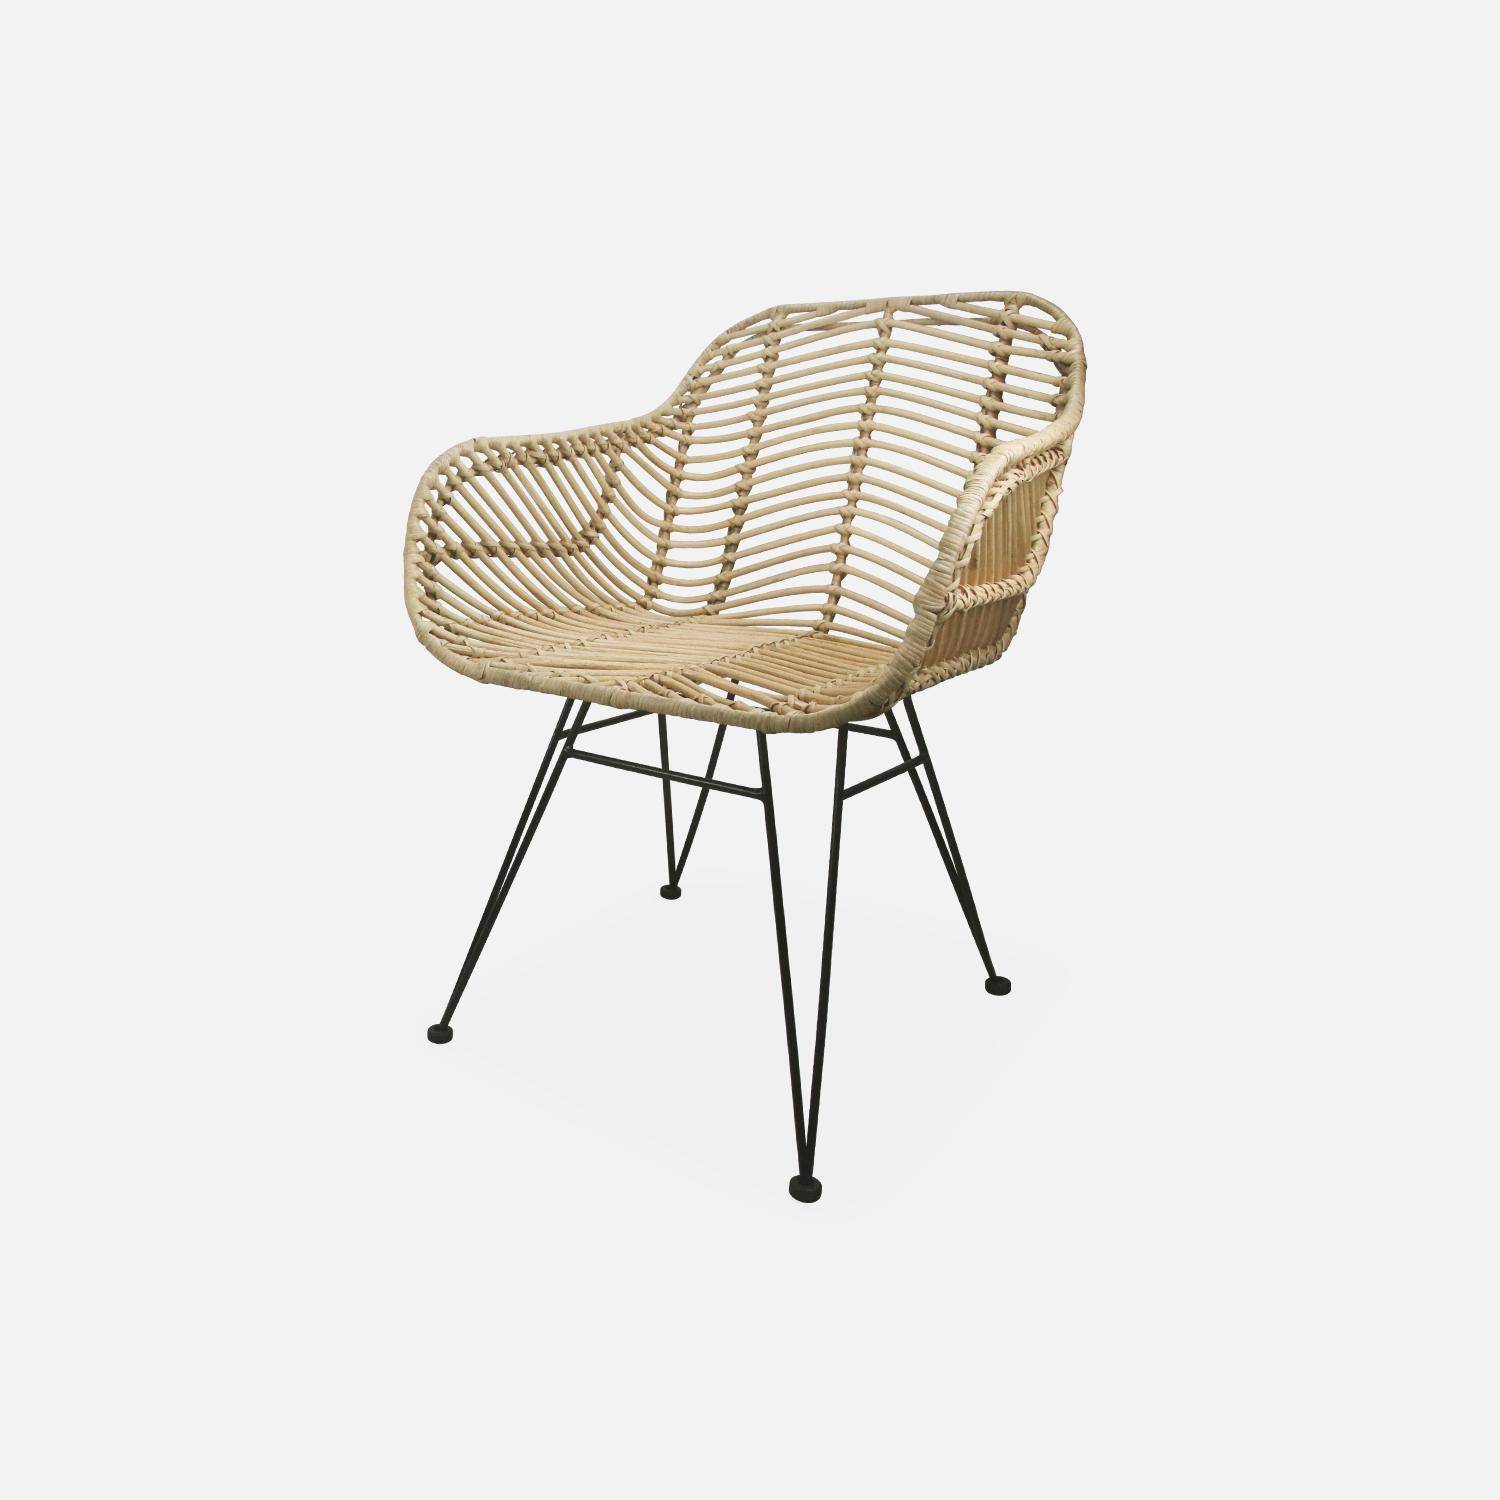 Rattan dining armchair with metal legs and cushion - Cahya - Natural rattan, White cushion Photo5